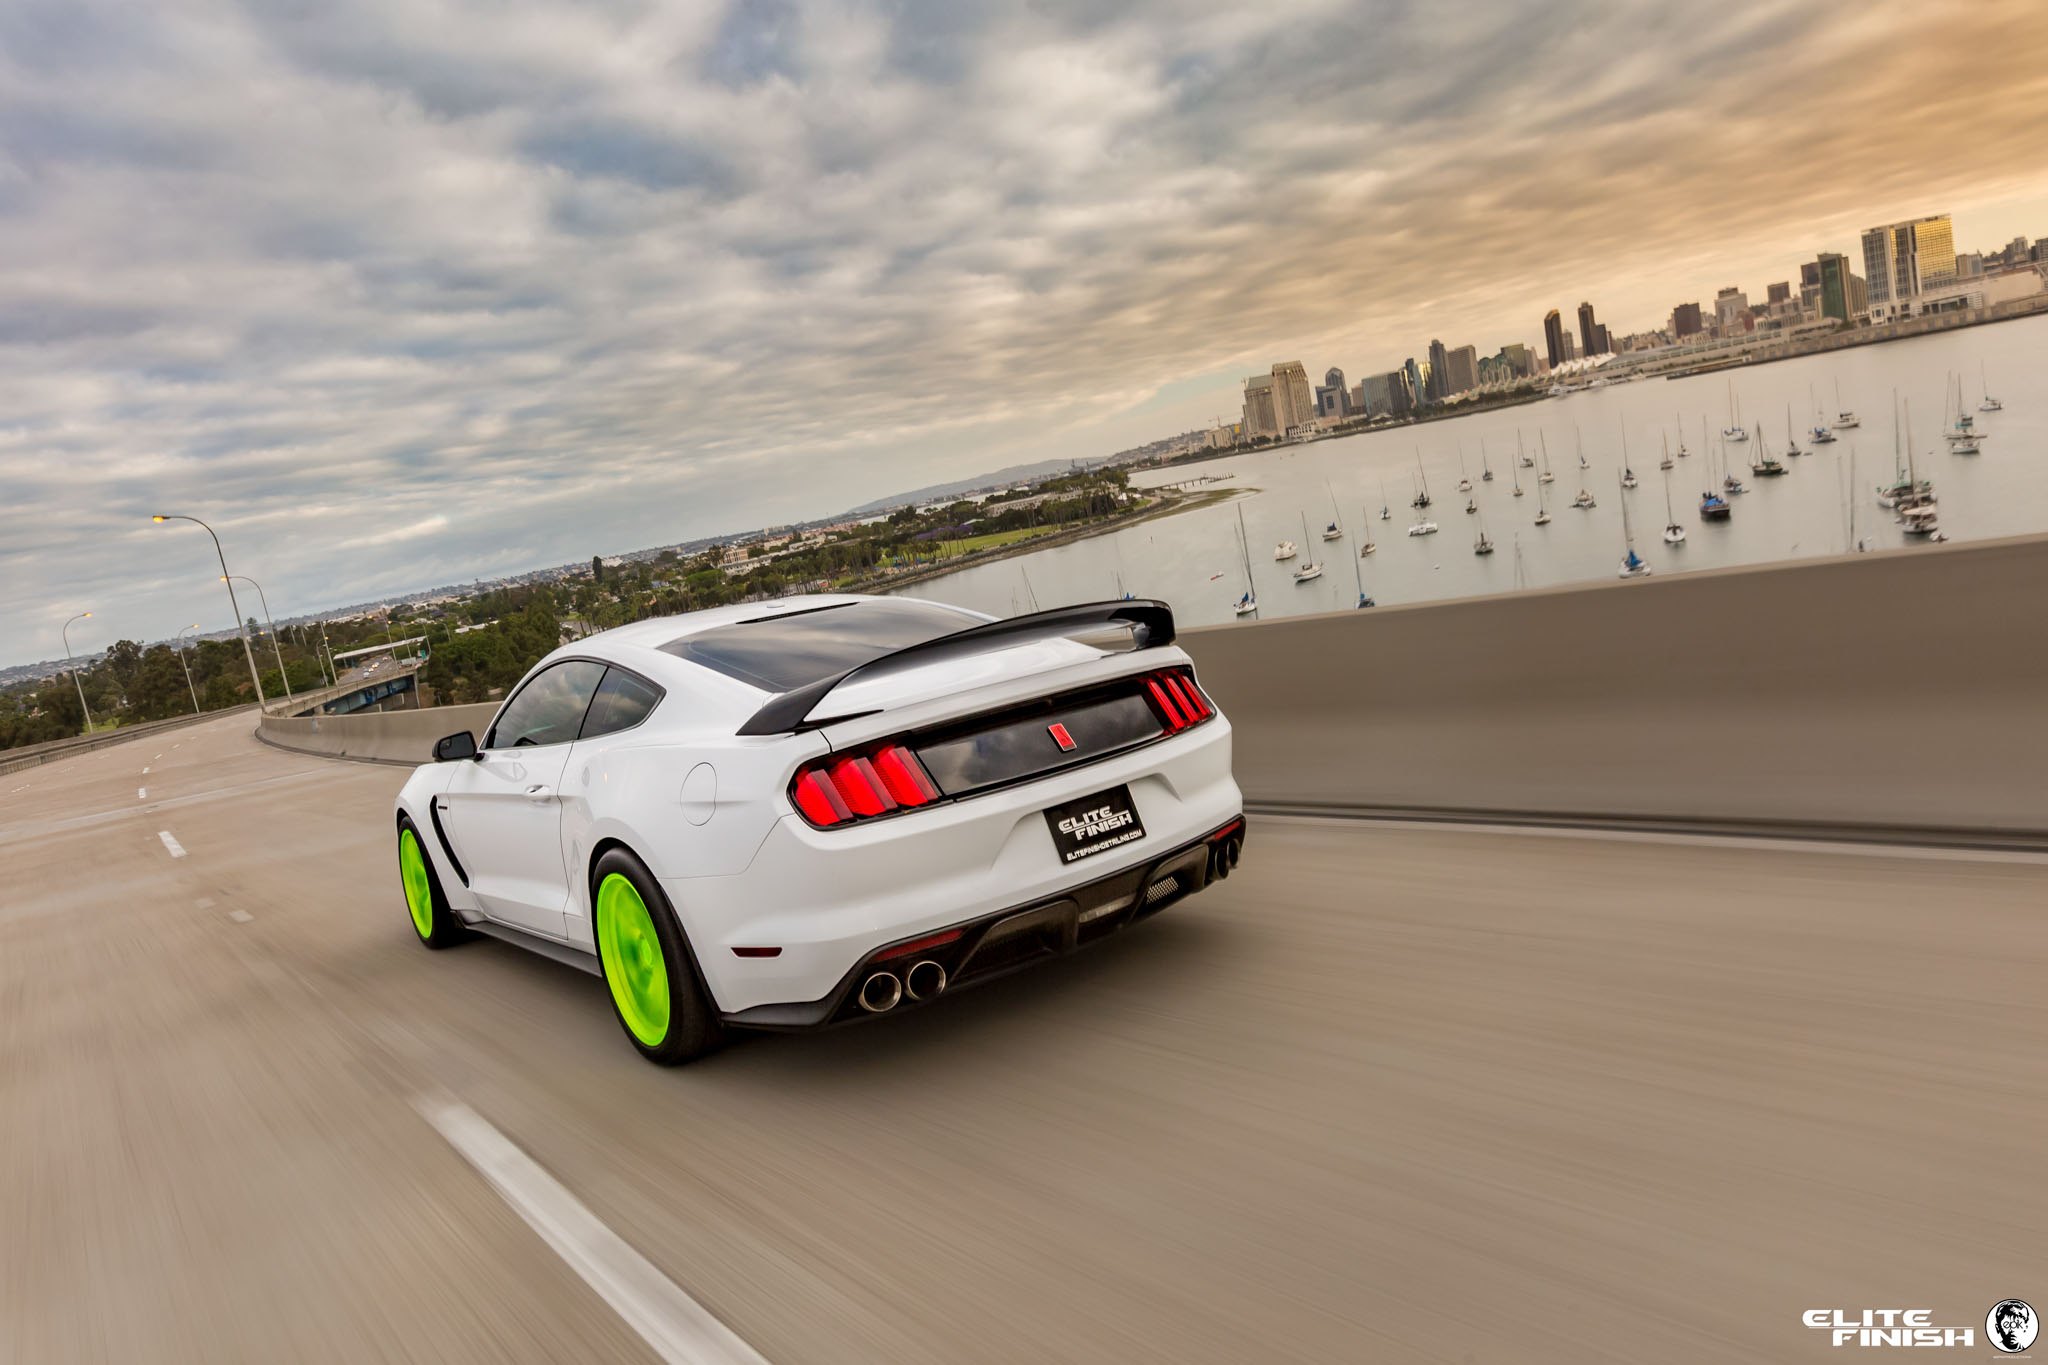 Custom Style Rear Spoiler on White Ford Mustang - Photo by HRE Wheels